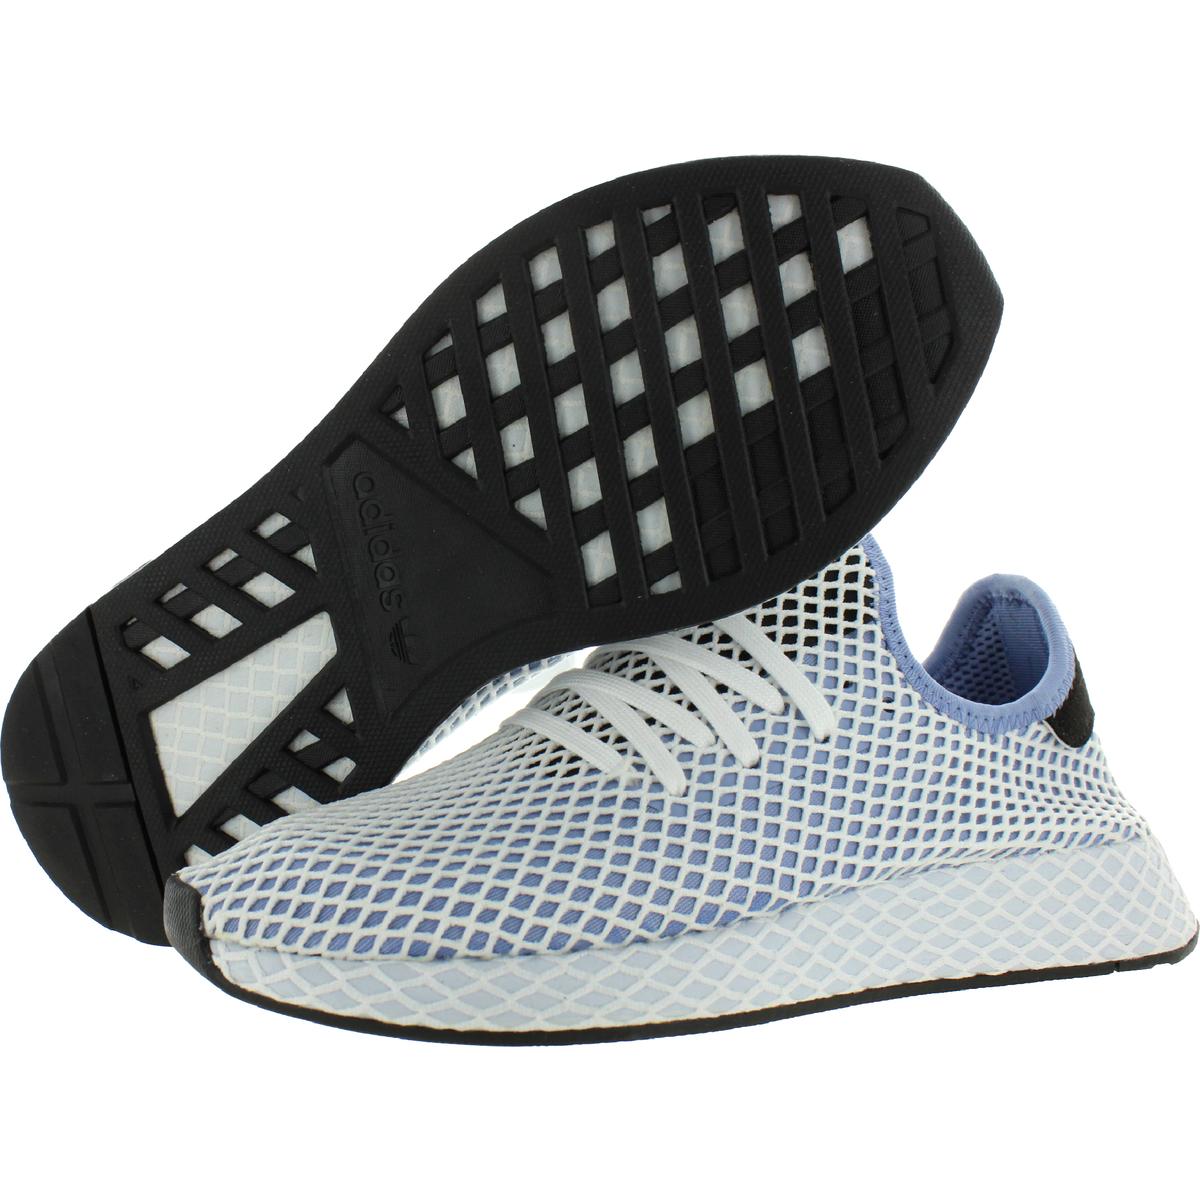 Sticky activity Perth Blackborough Adidas Deerupt Runner W Womens Running Performance Athletic Shoes